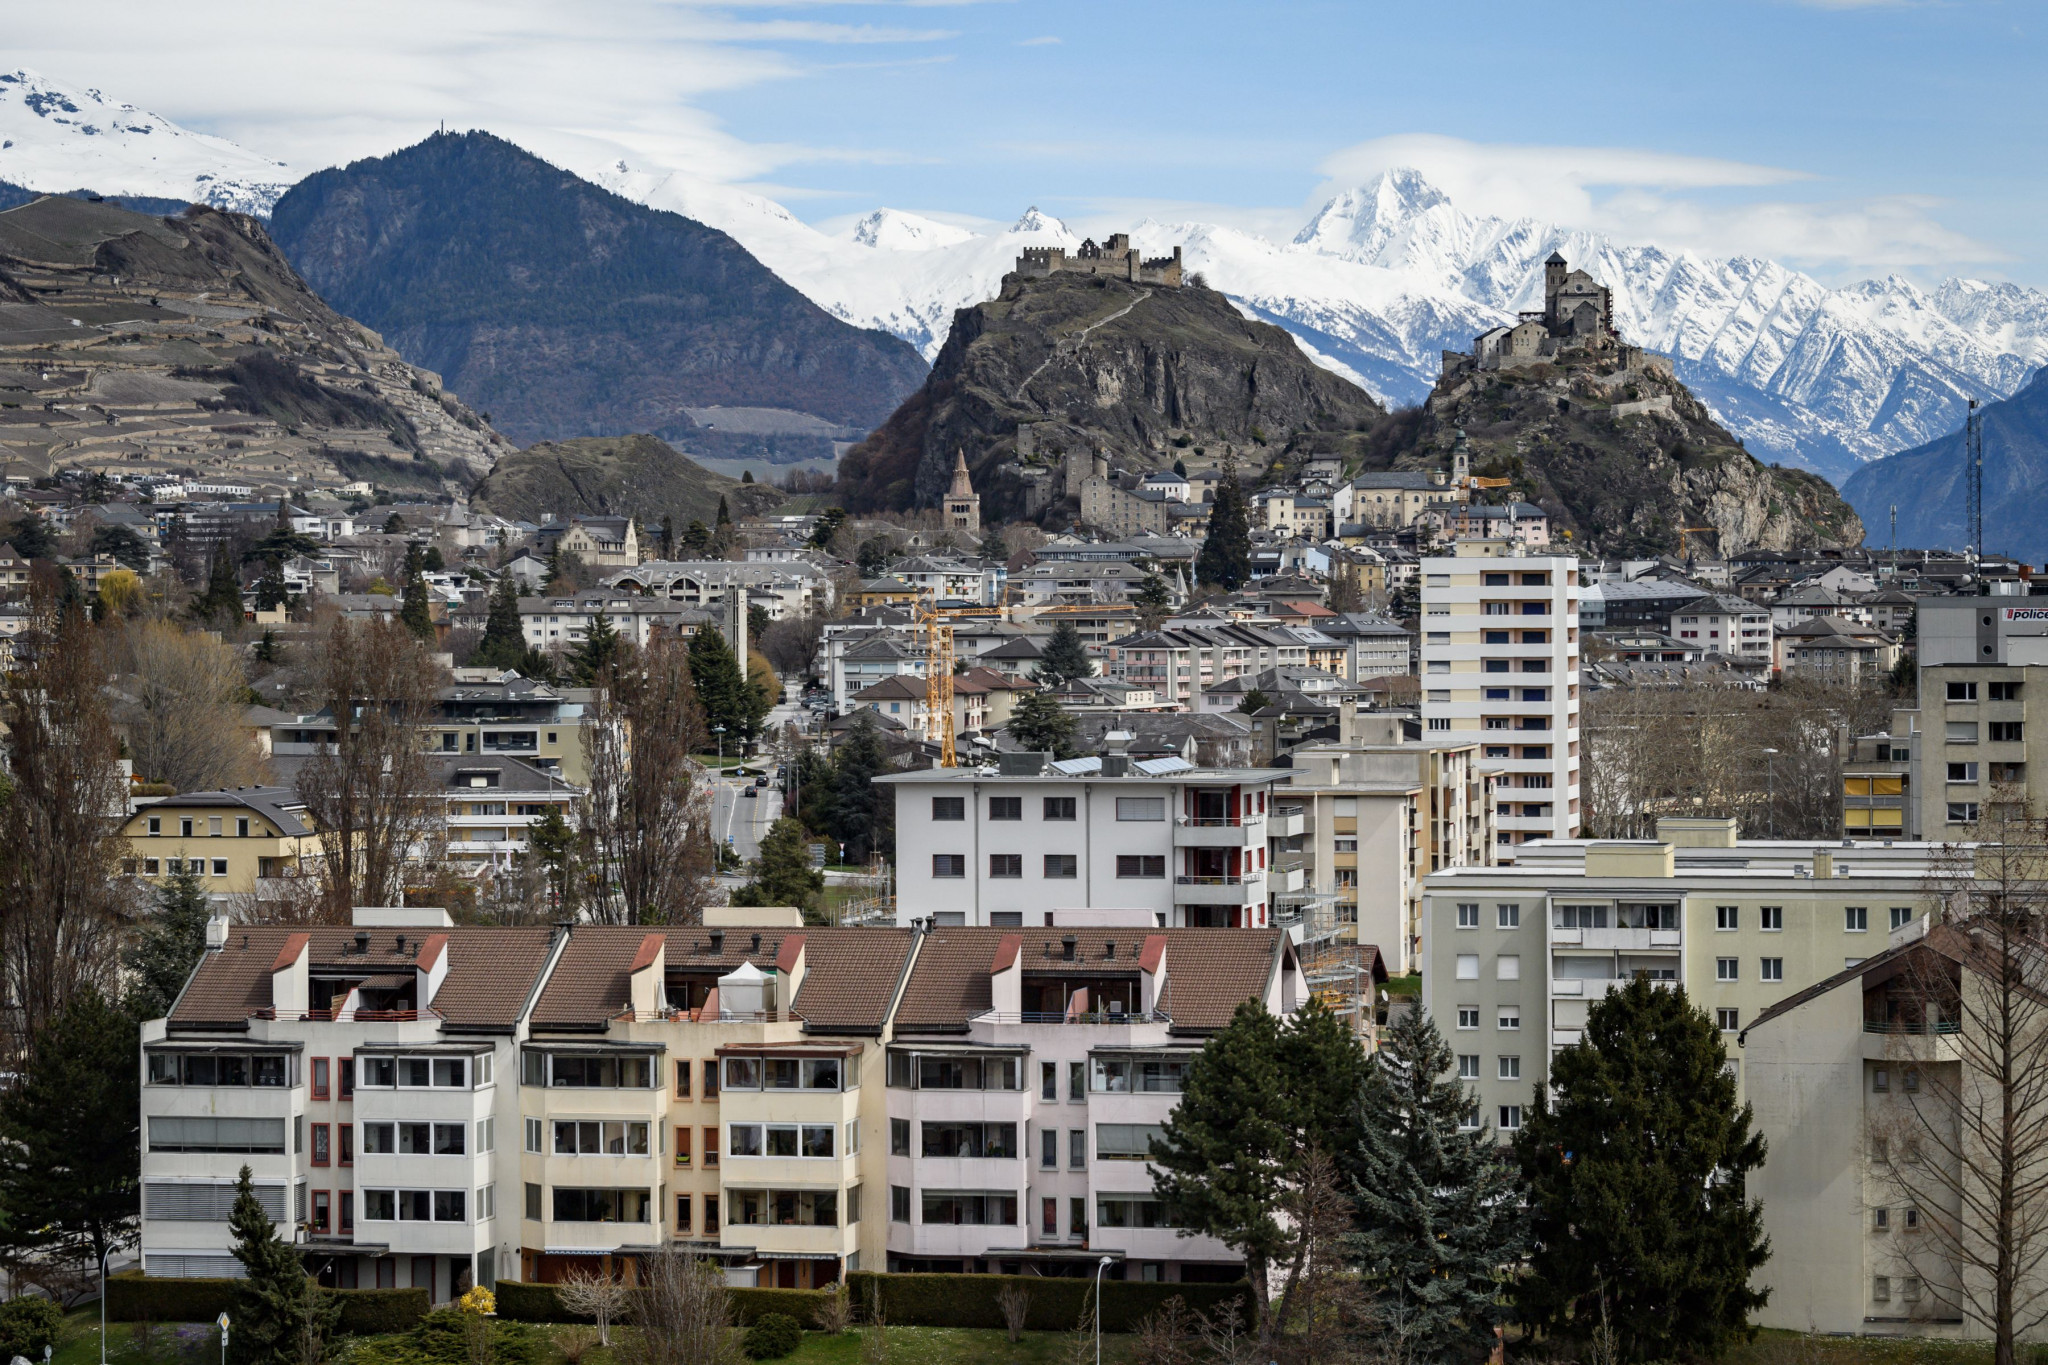 Sion 2026 hope approval of ski jumping plans offers good sign on eve of referendum